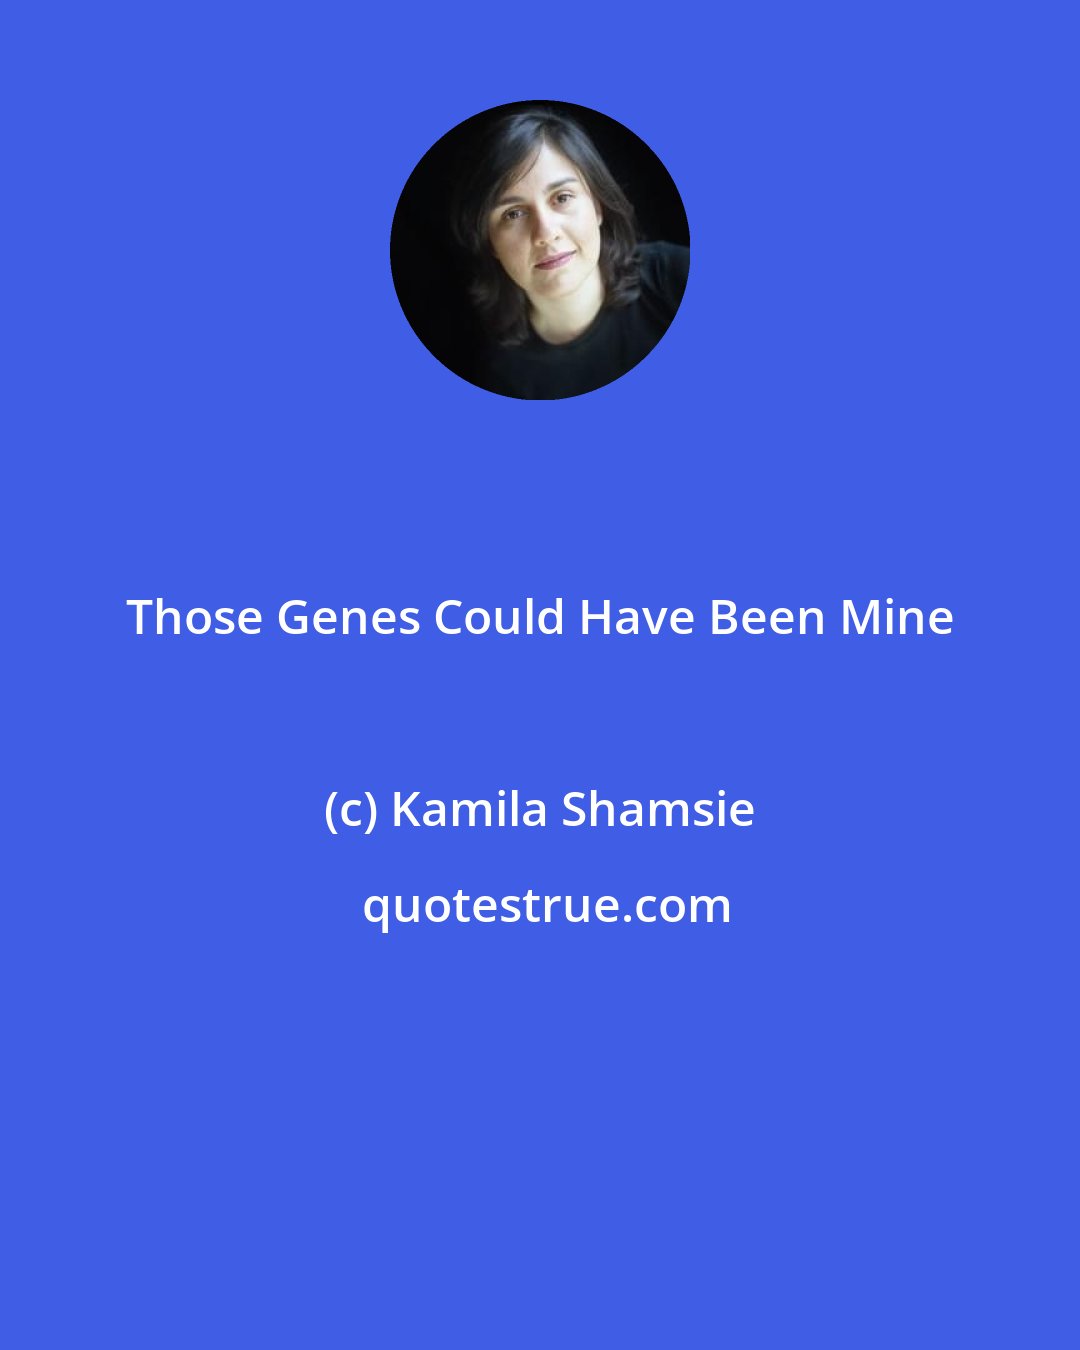 Kamila Shamsie: Those Genes Could Have Been Mine